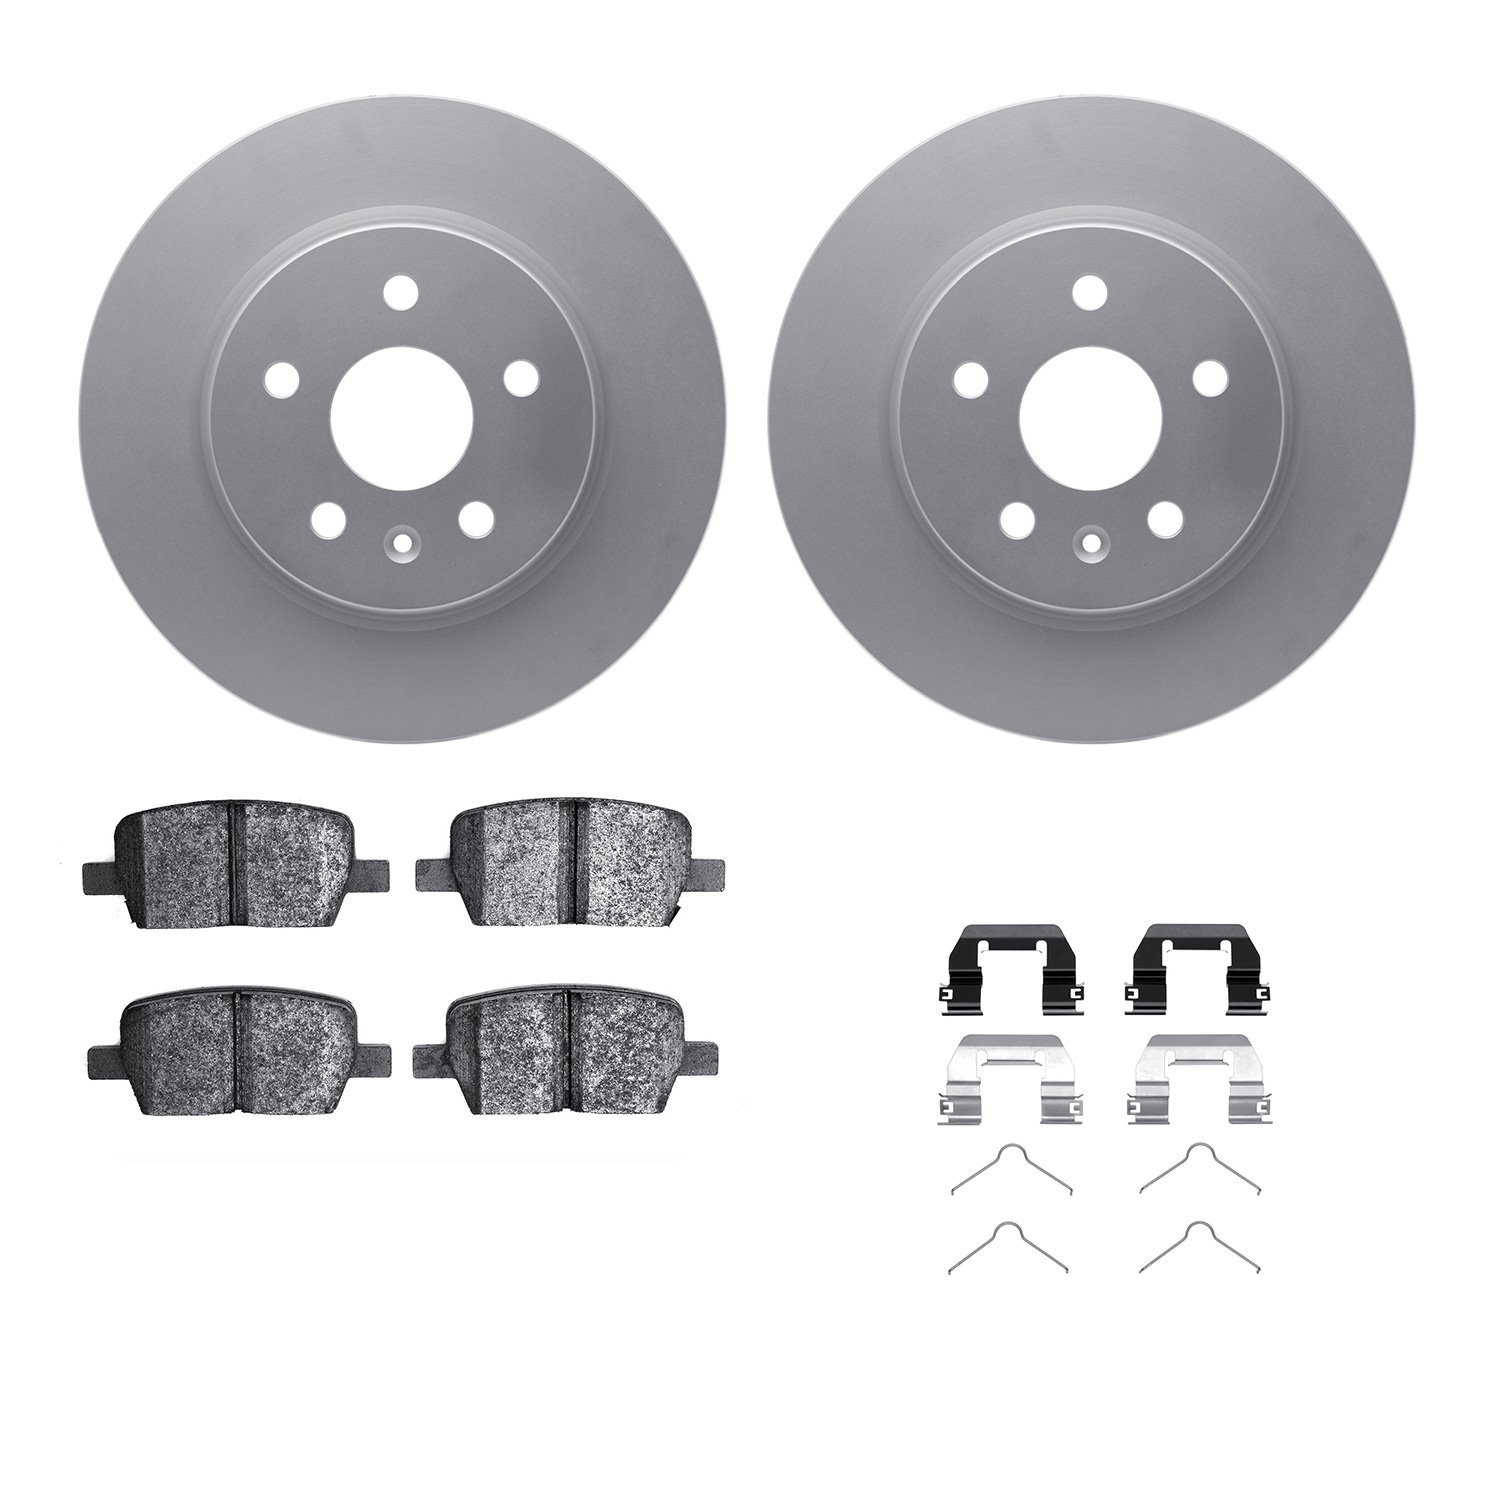 4312-65017 Geospec Brake Rotors with 3000-Series Ceramic Brake Pads & Hardware, Fits Select GM, Position: Rear